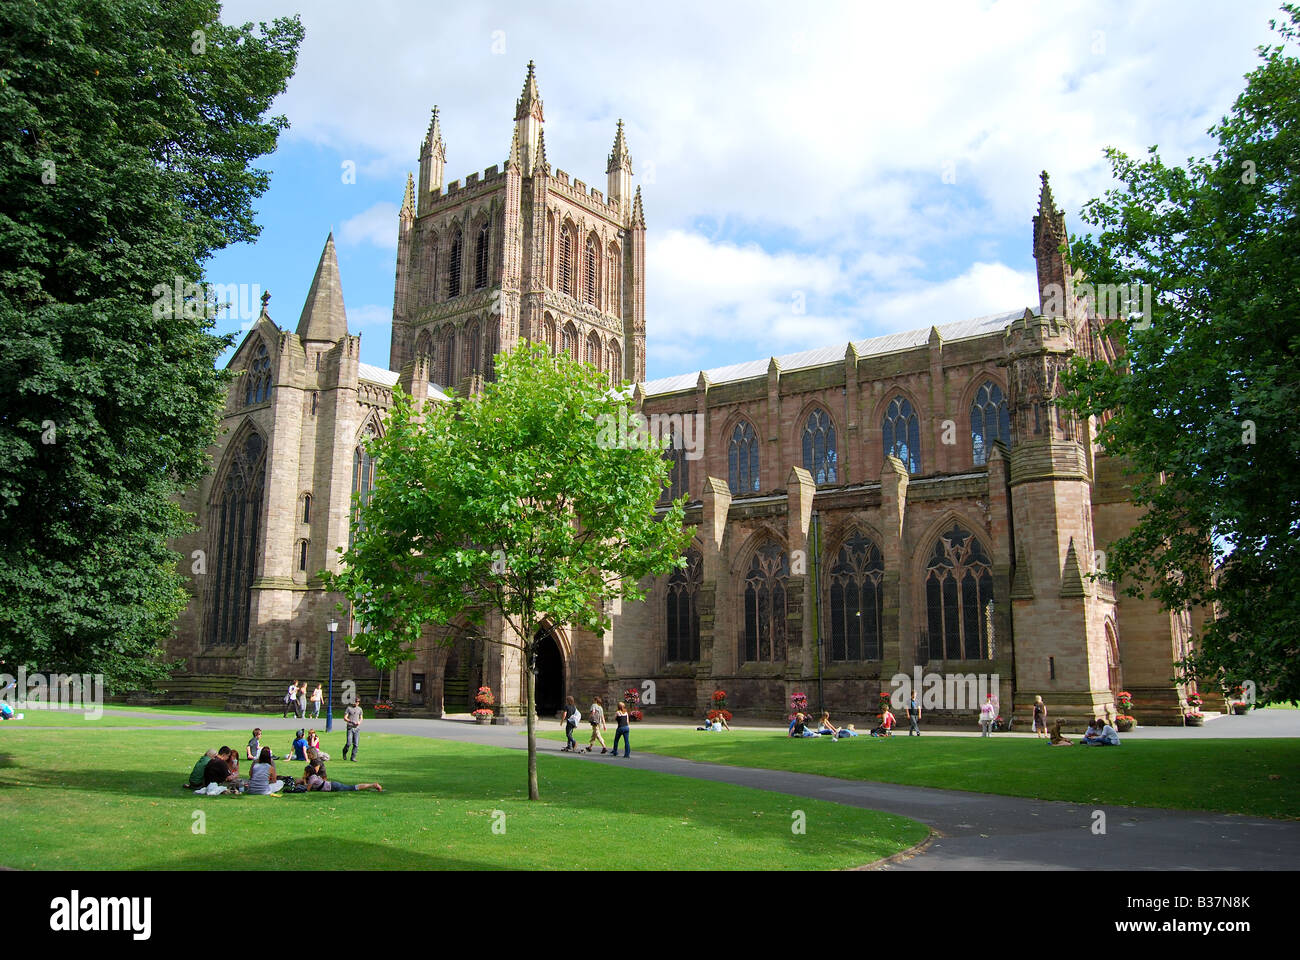 Hereford Cathedral, Hereford, Herefordshire, England, United Kingdom Stock Photo